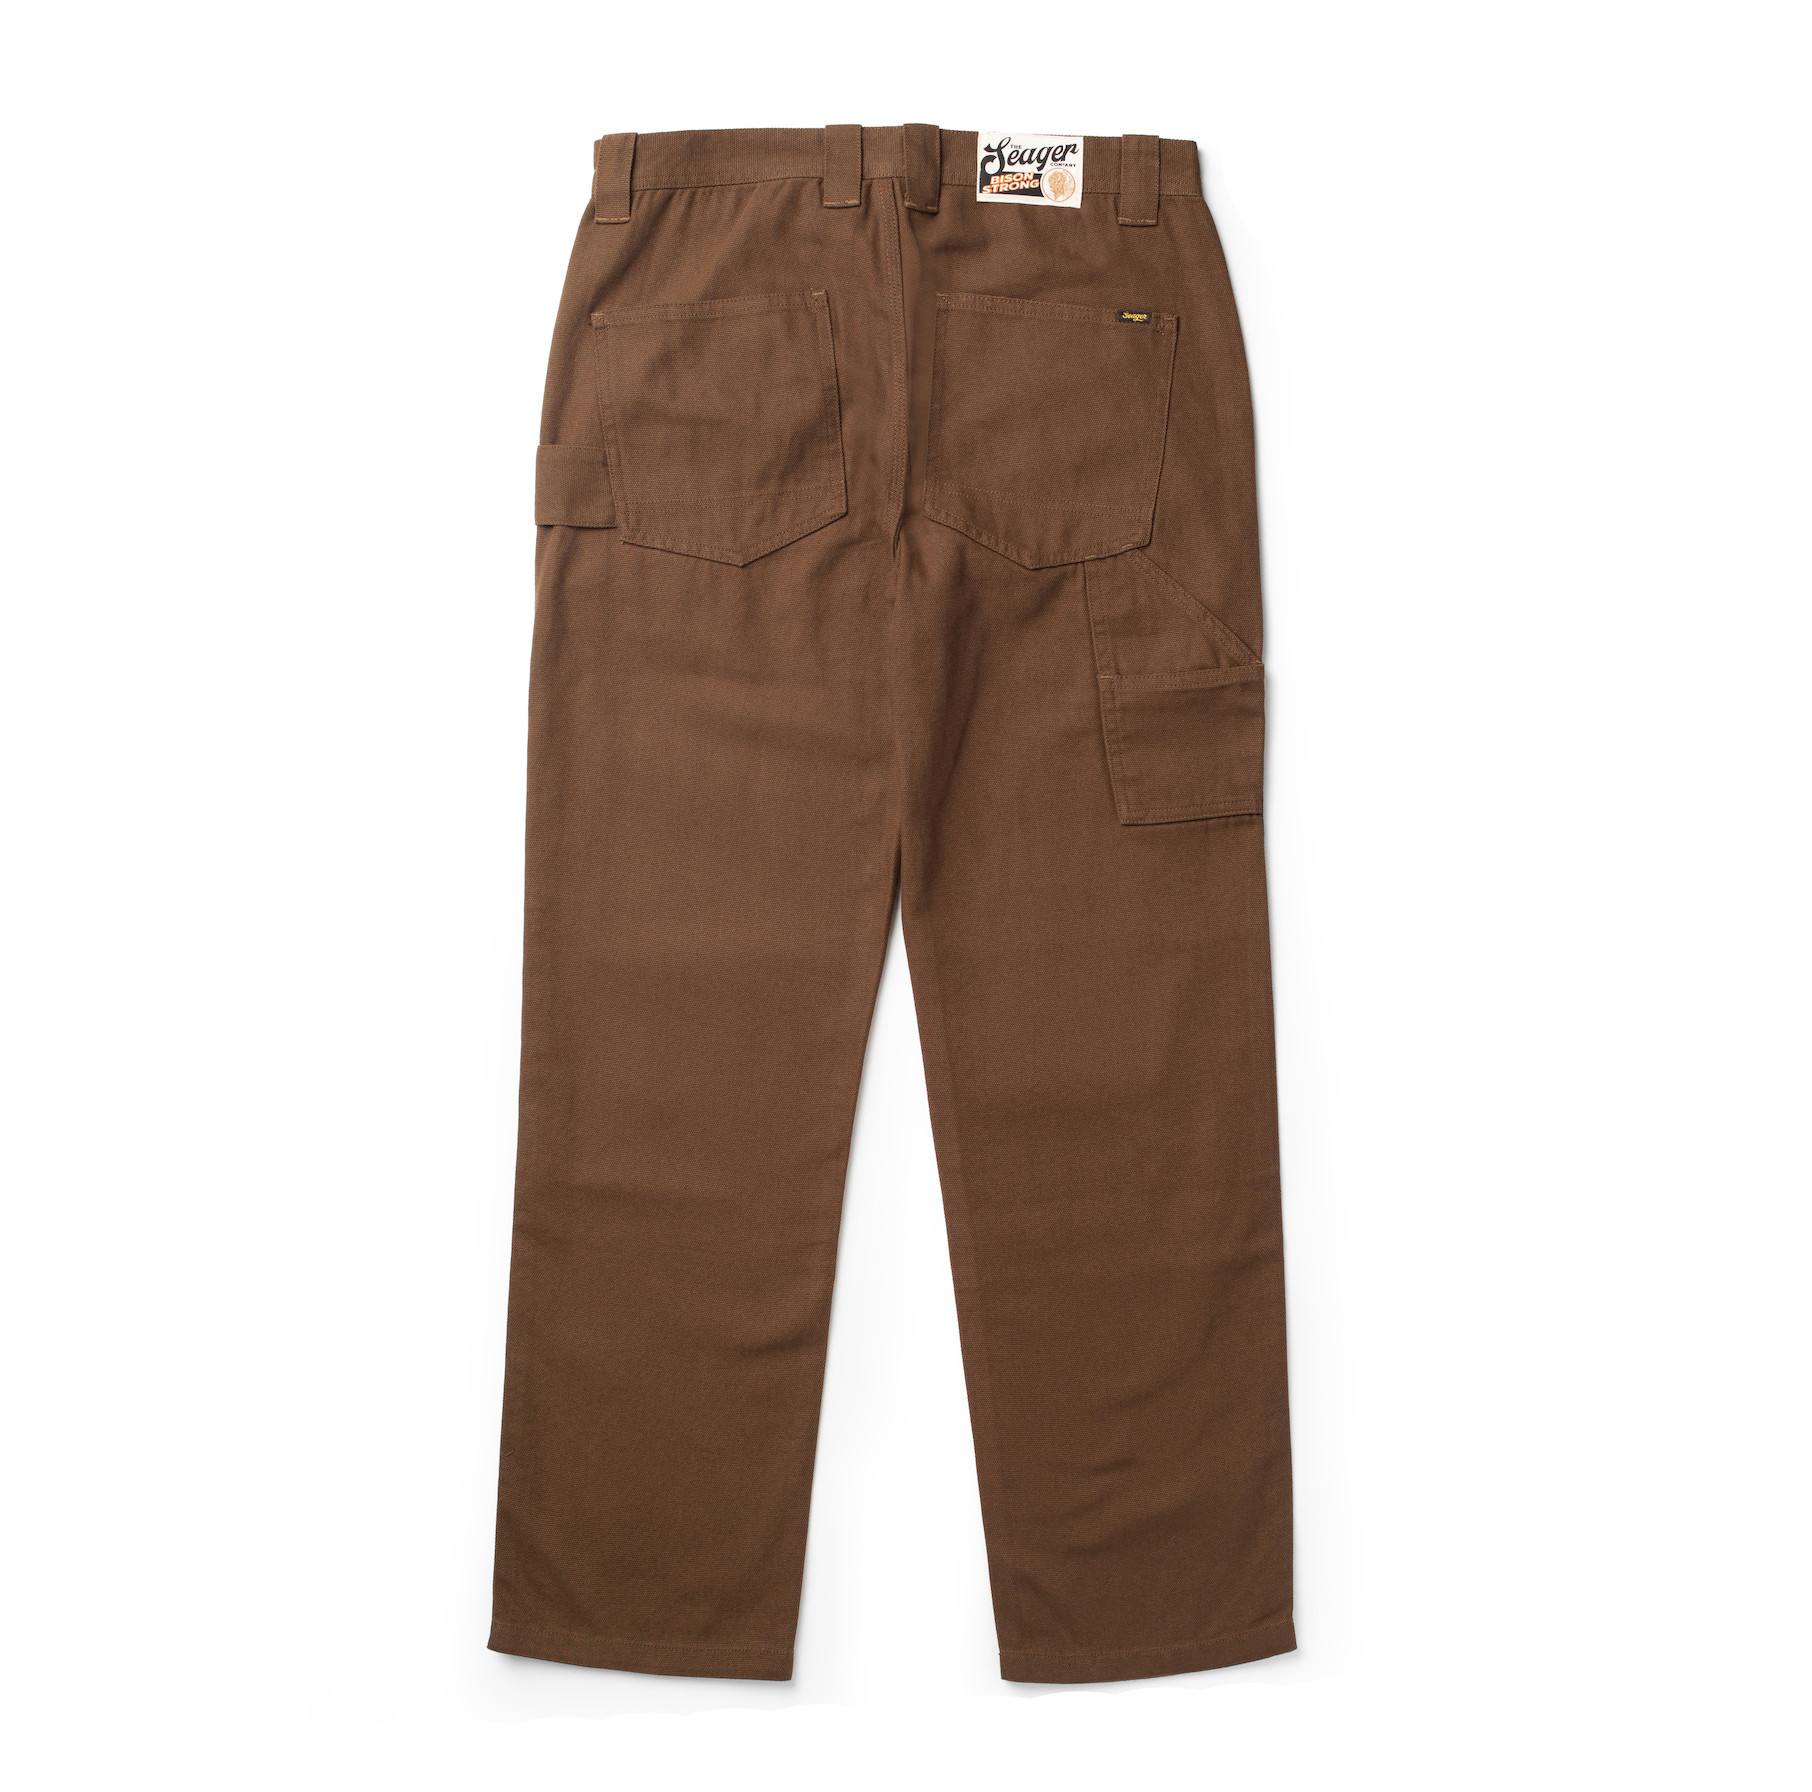 Find Single Knee Pant in Brown Carhartt WIP in our store you will love at  great bargain costs